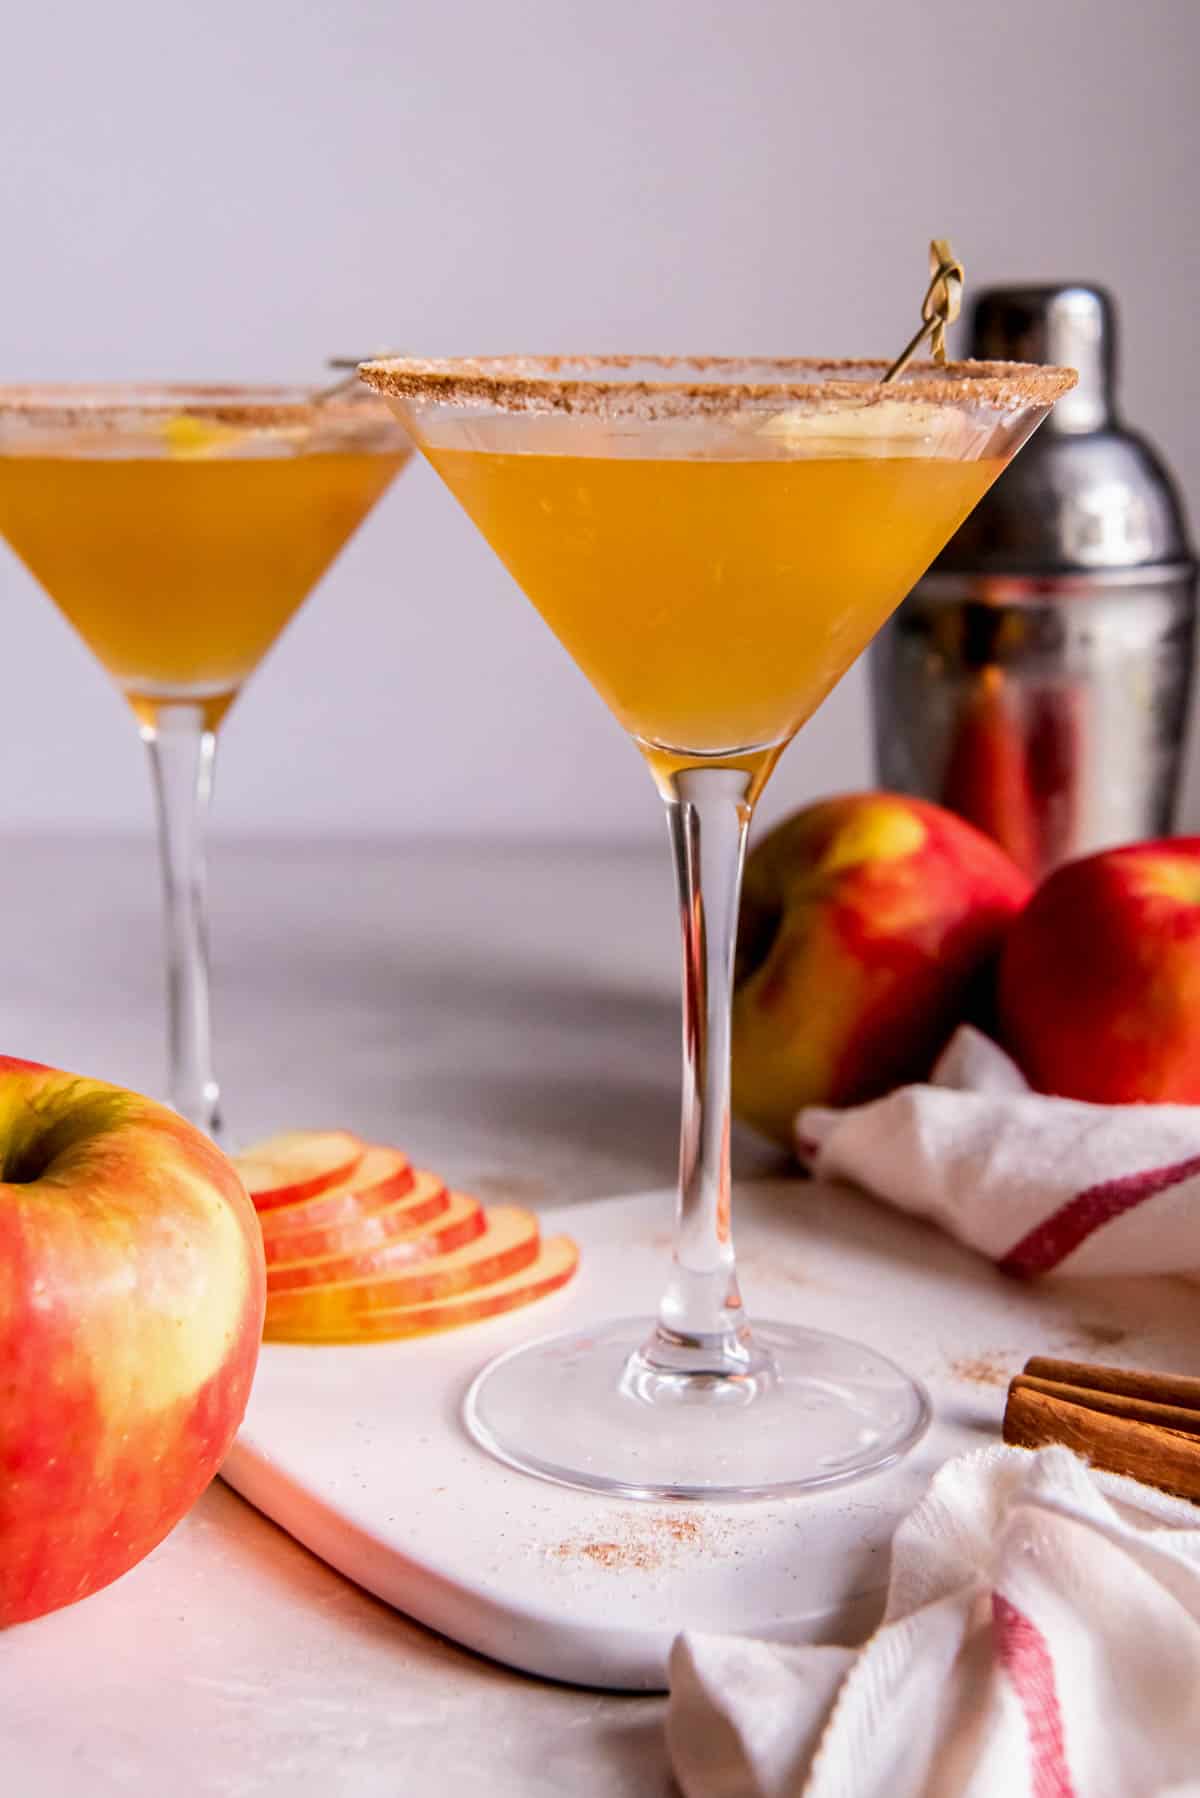 Two martini glasses with apple cider vodka martini. The glasses are rimmed with cinnamon sugar and a cocktail shaker with apples sites to the side of the drinks.